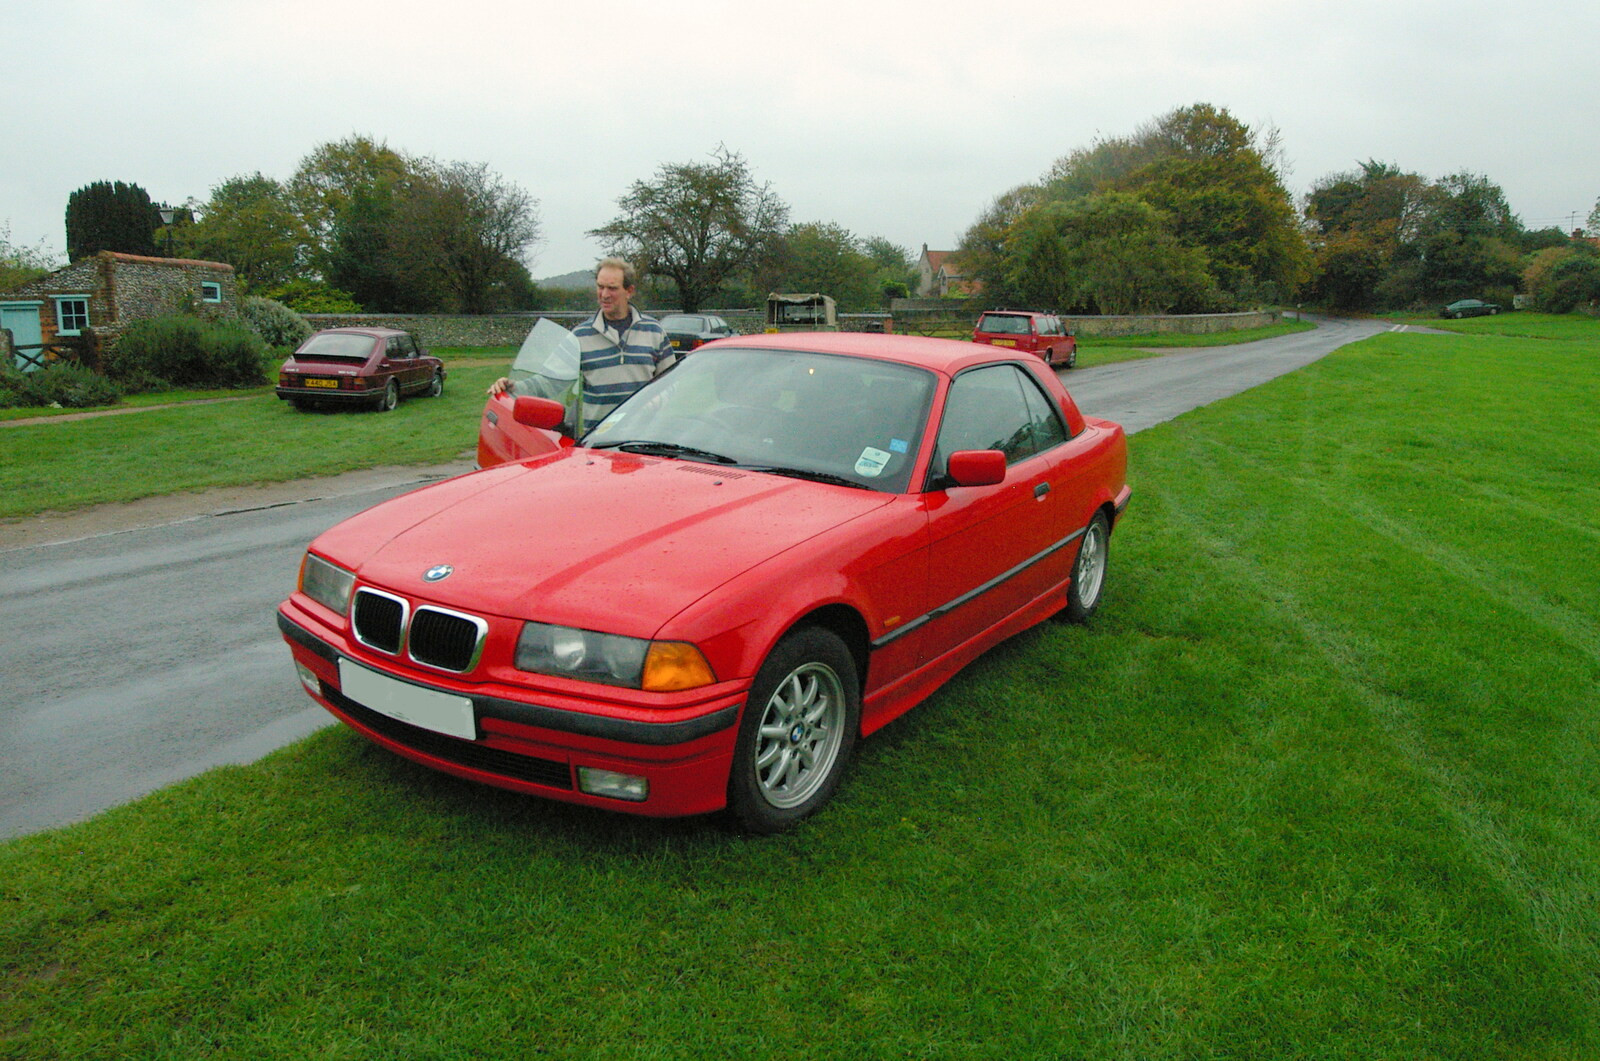 Mike's new BMW from Mother, Mike and the Stiffkey Light Shop, Cley and Holkham - 6th November 2005